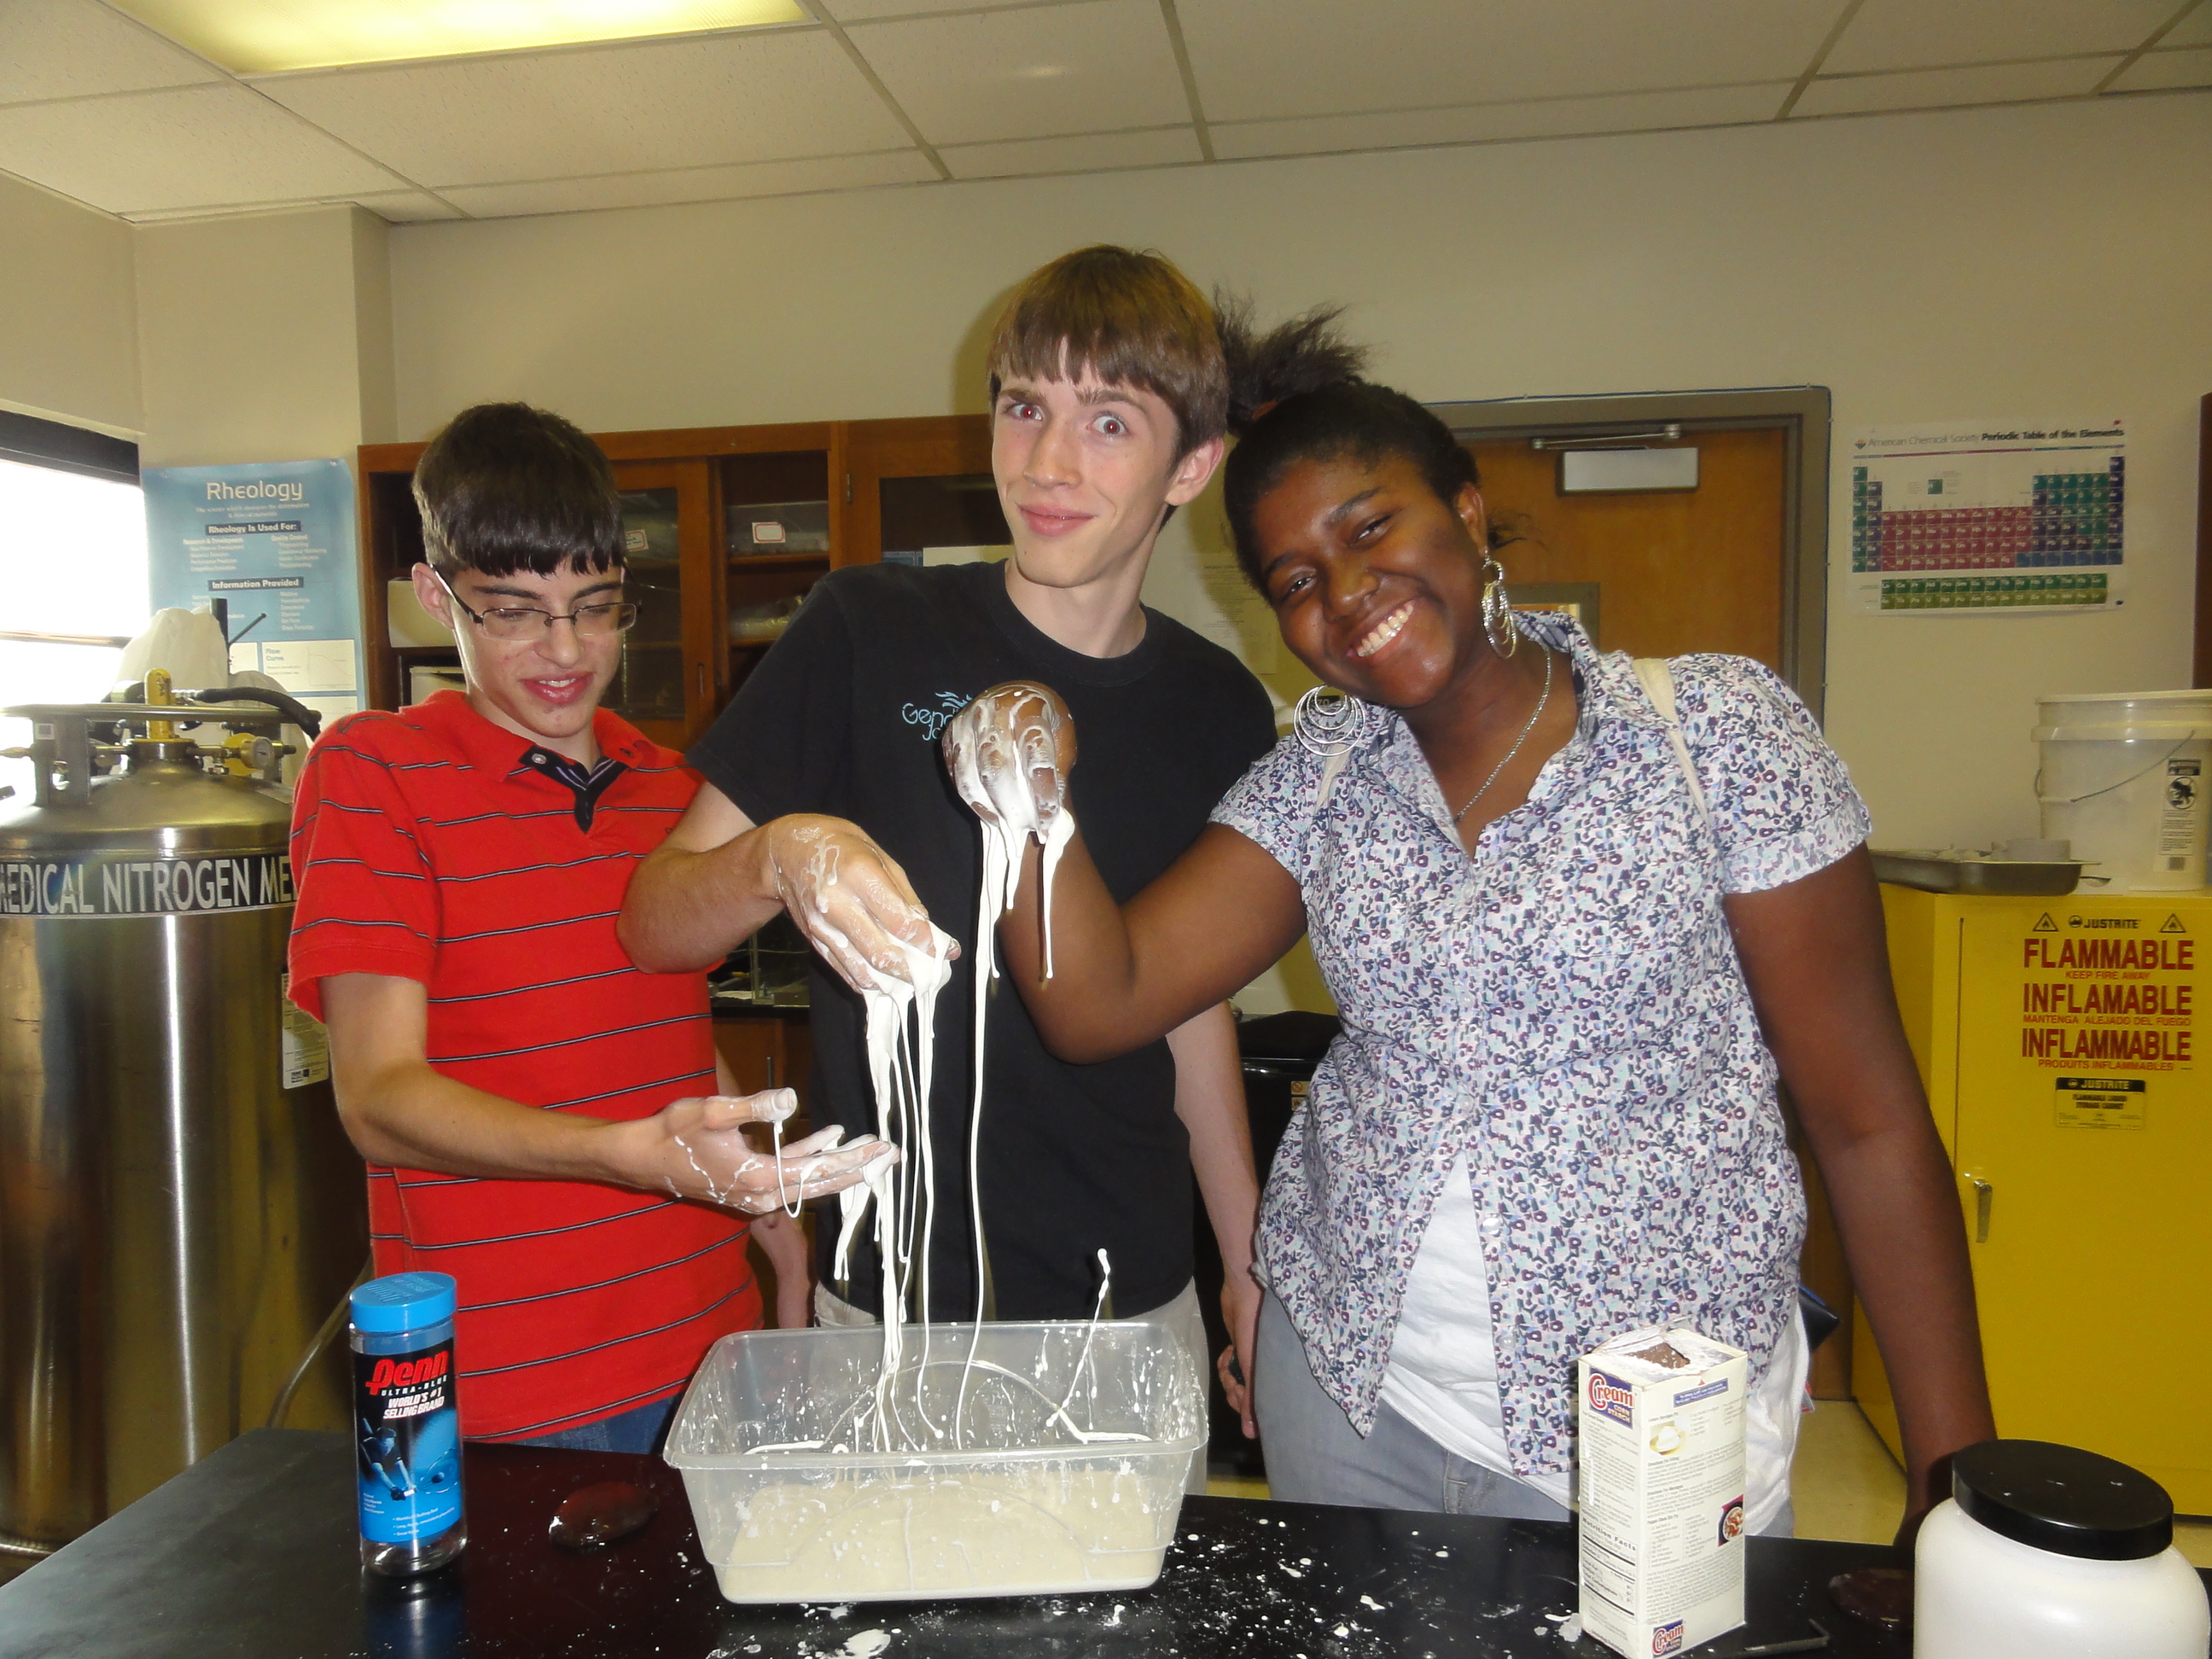 Three students each have a hand in a runny material with interesting properties.